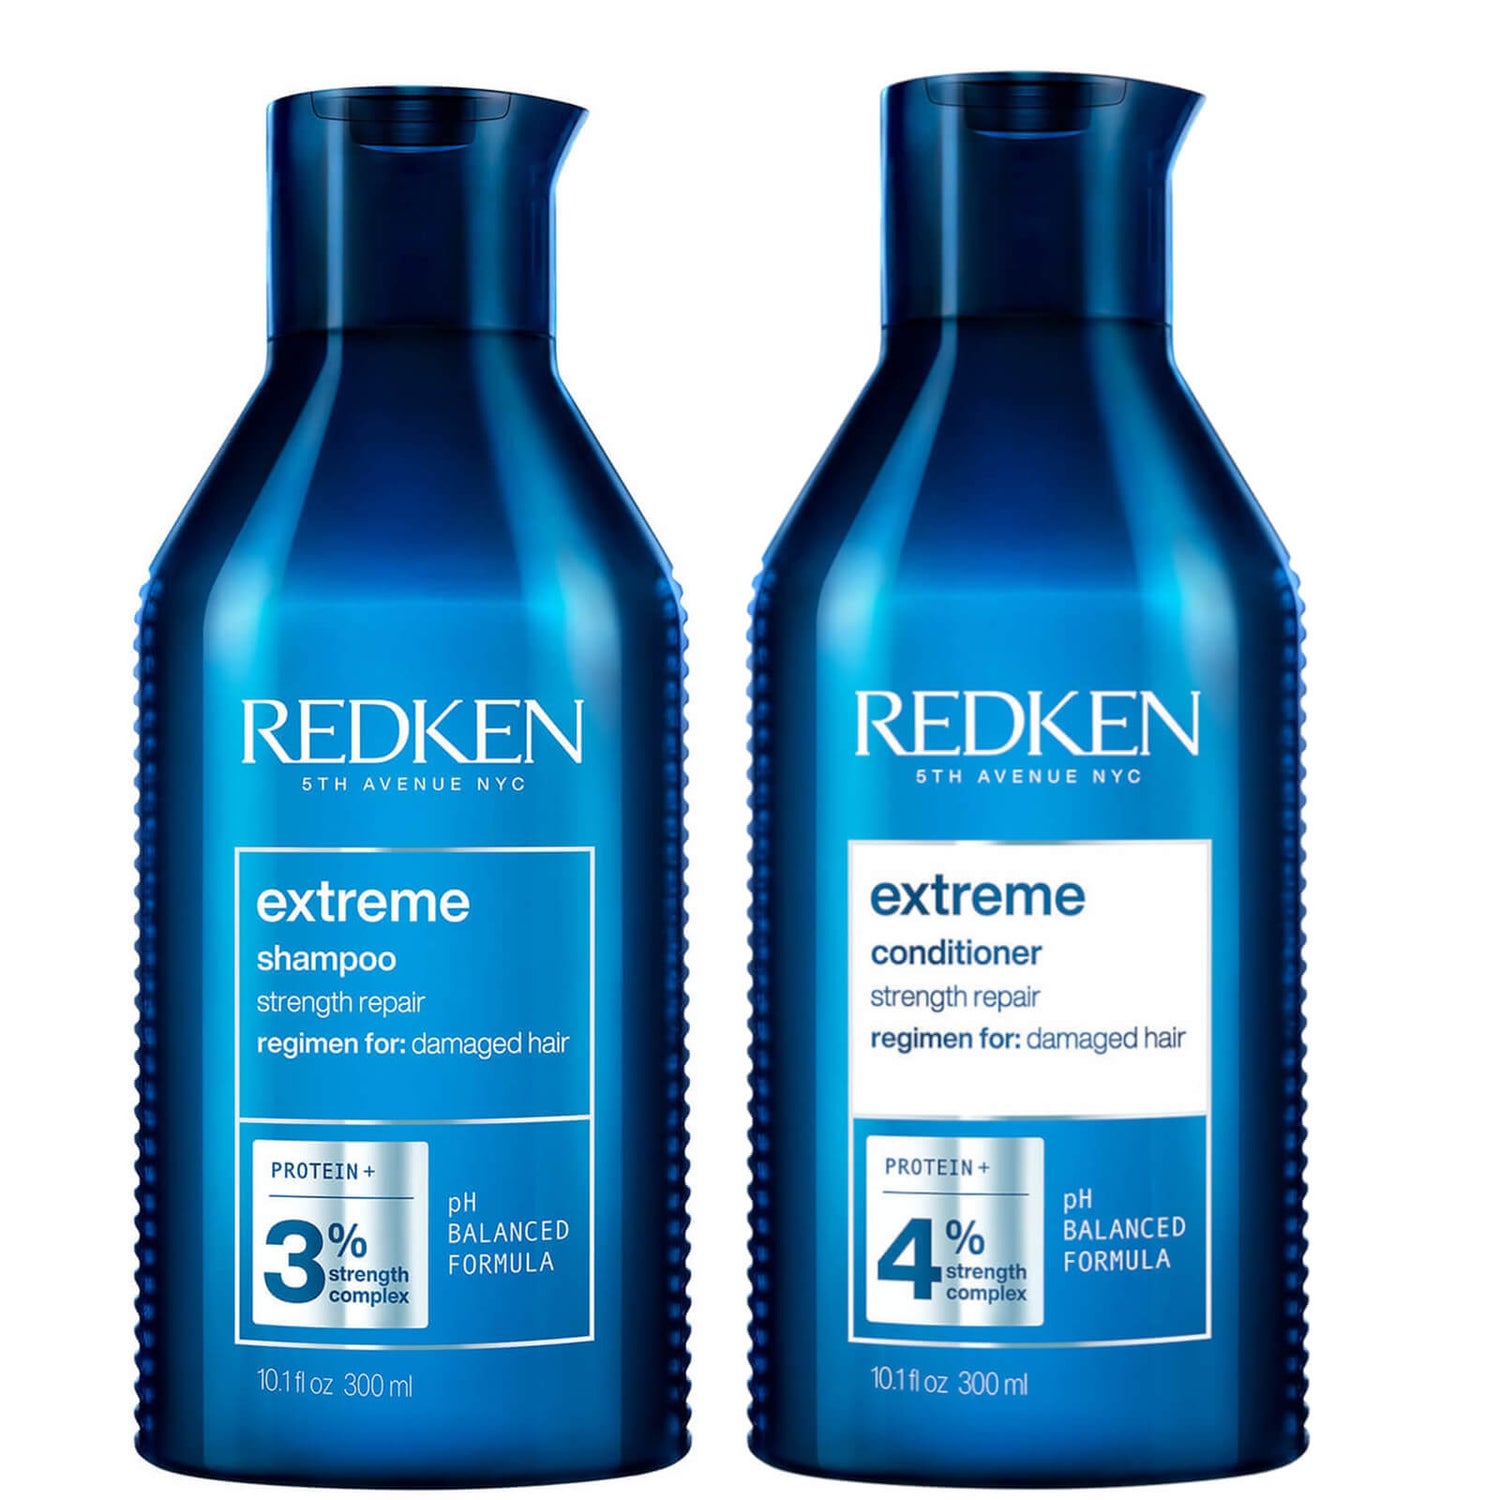 Redken Extreme Shampoo and Conditioner Duo (2 x 300ml)